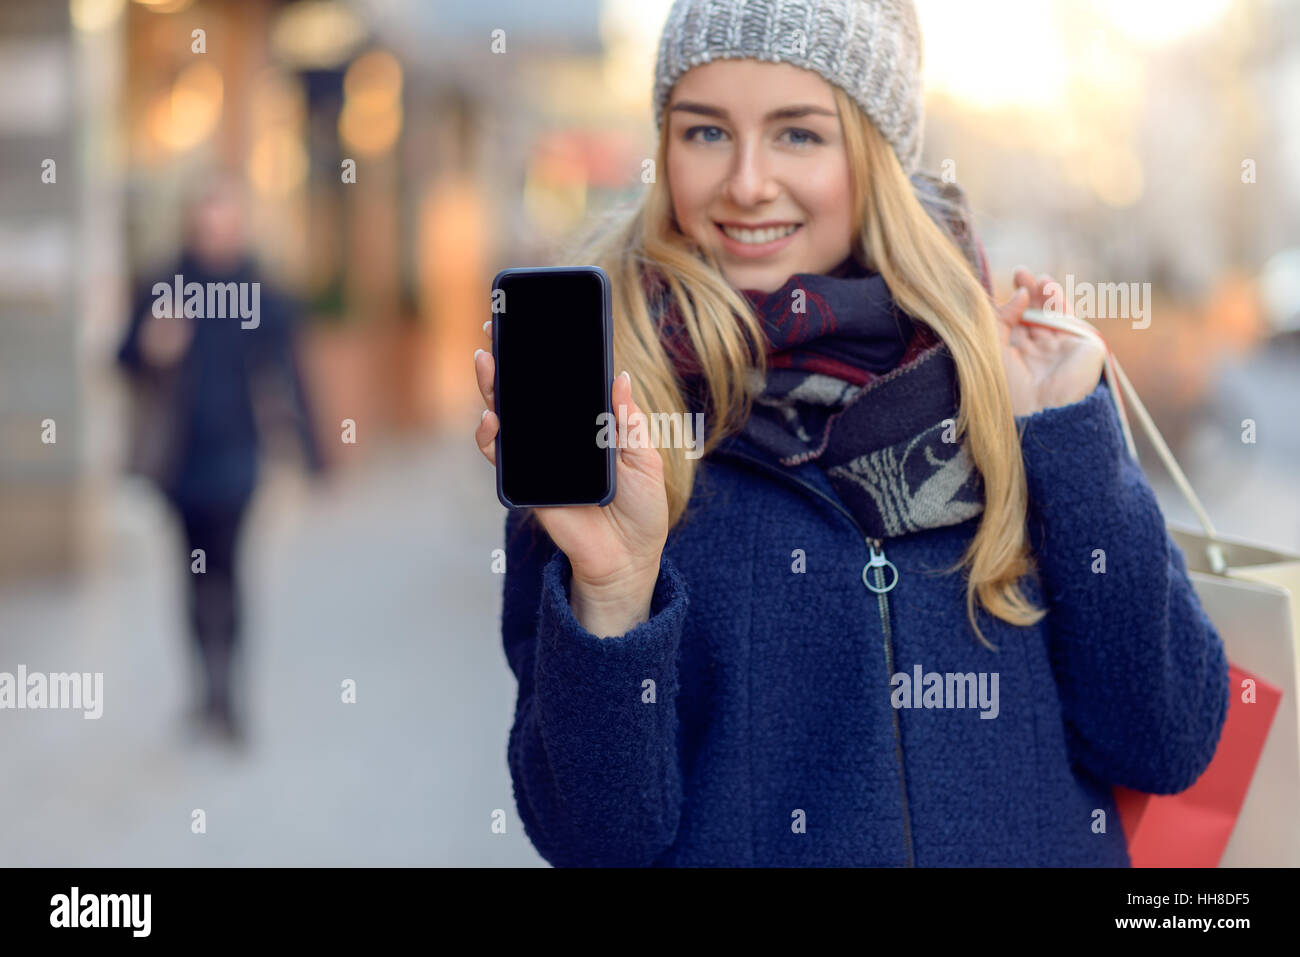 Pretty young woman holding up her mobile phone with a blank display as she stands on an urban street in winter warmly dressed in a knitted woollen sca Stock Photo